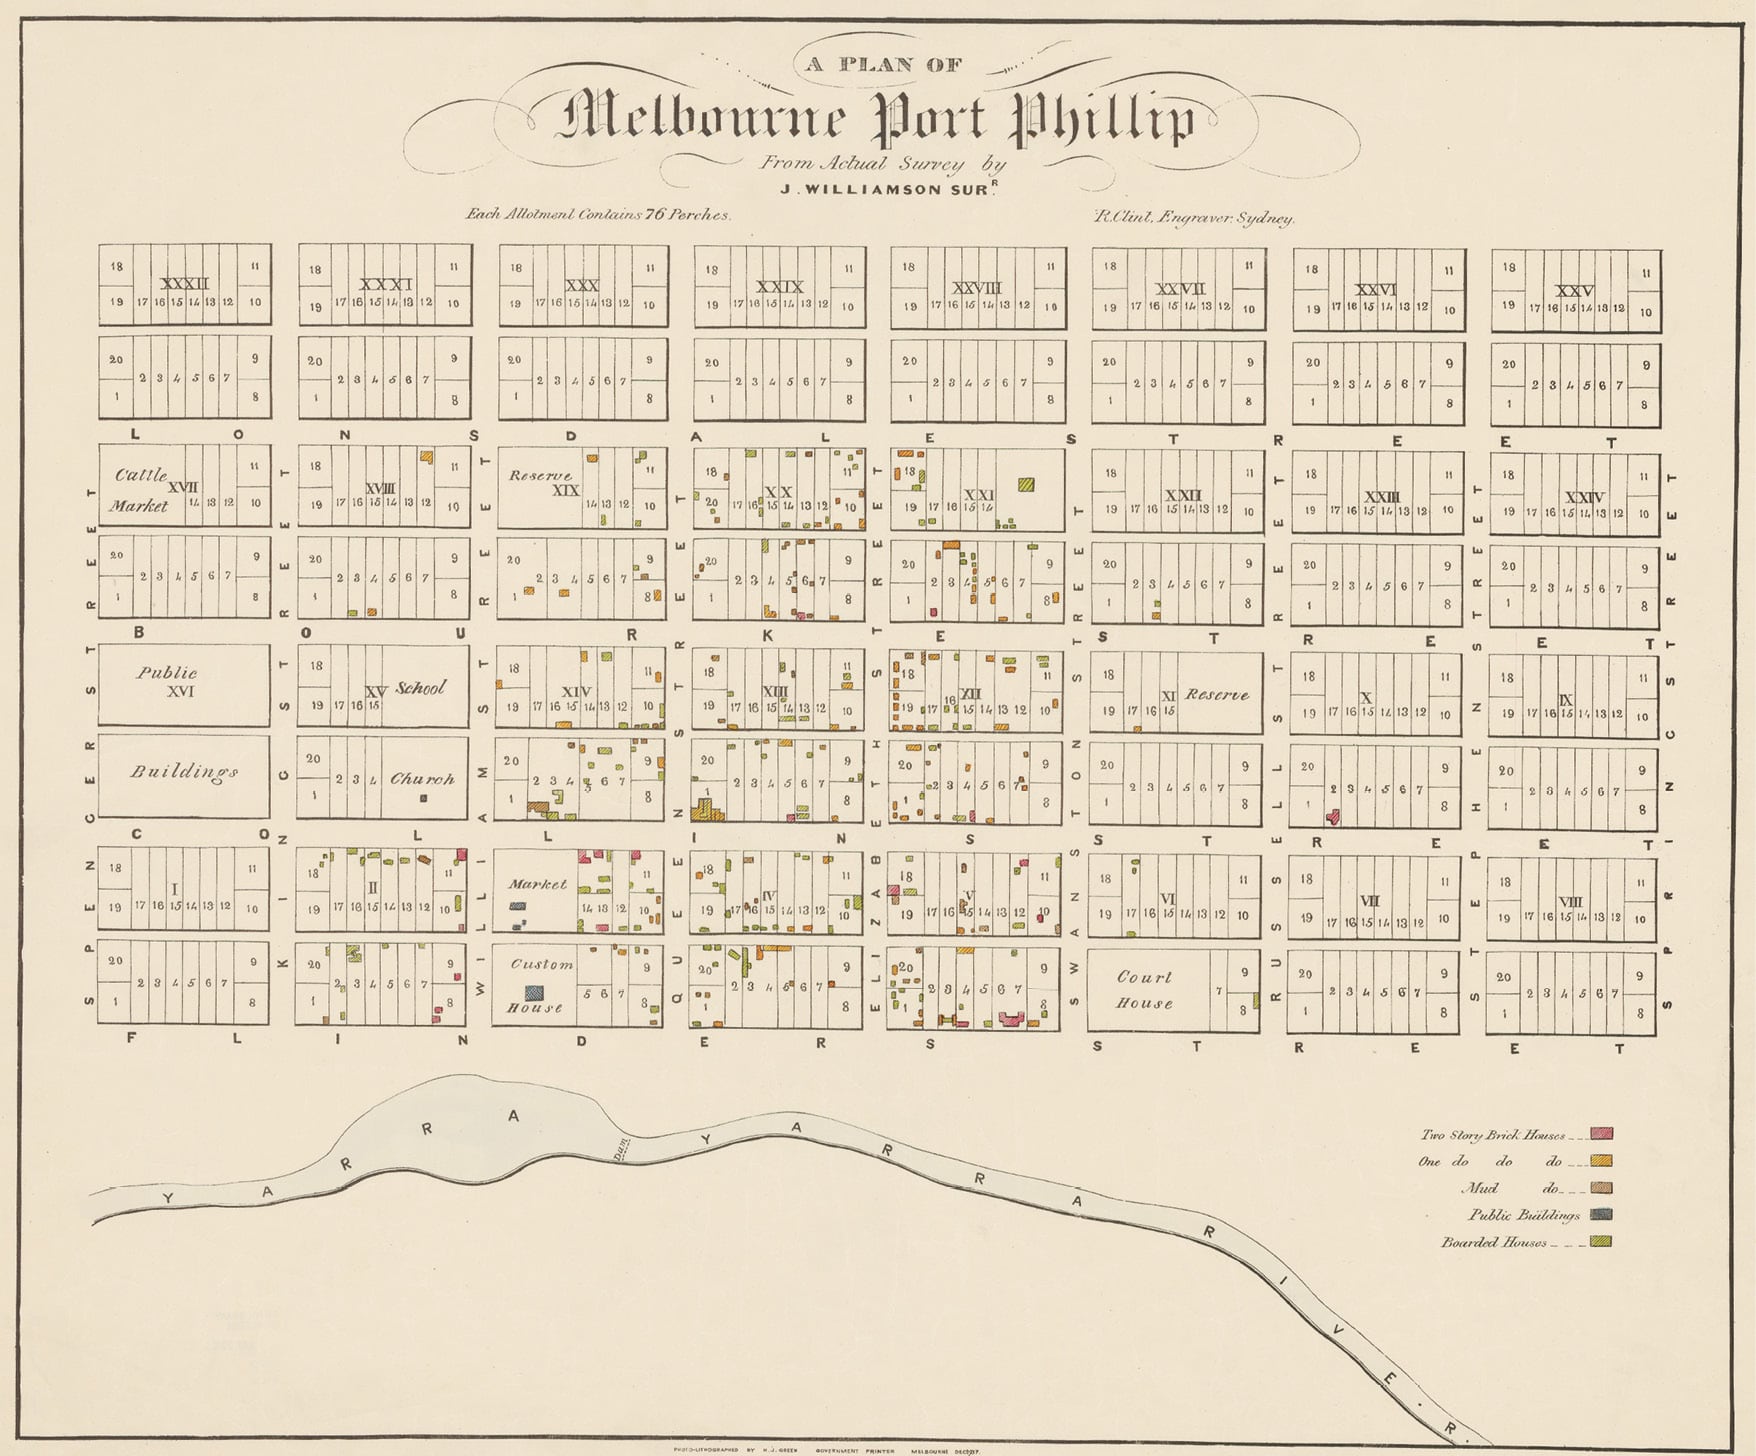 Map of central Melbourne showing location of brick houses, mud buildings, public buildings and boarded houses. J. Williamson, c. 1839. State Library of Victoria Maps Collection